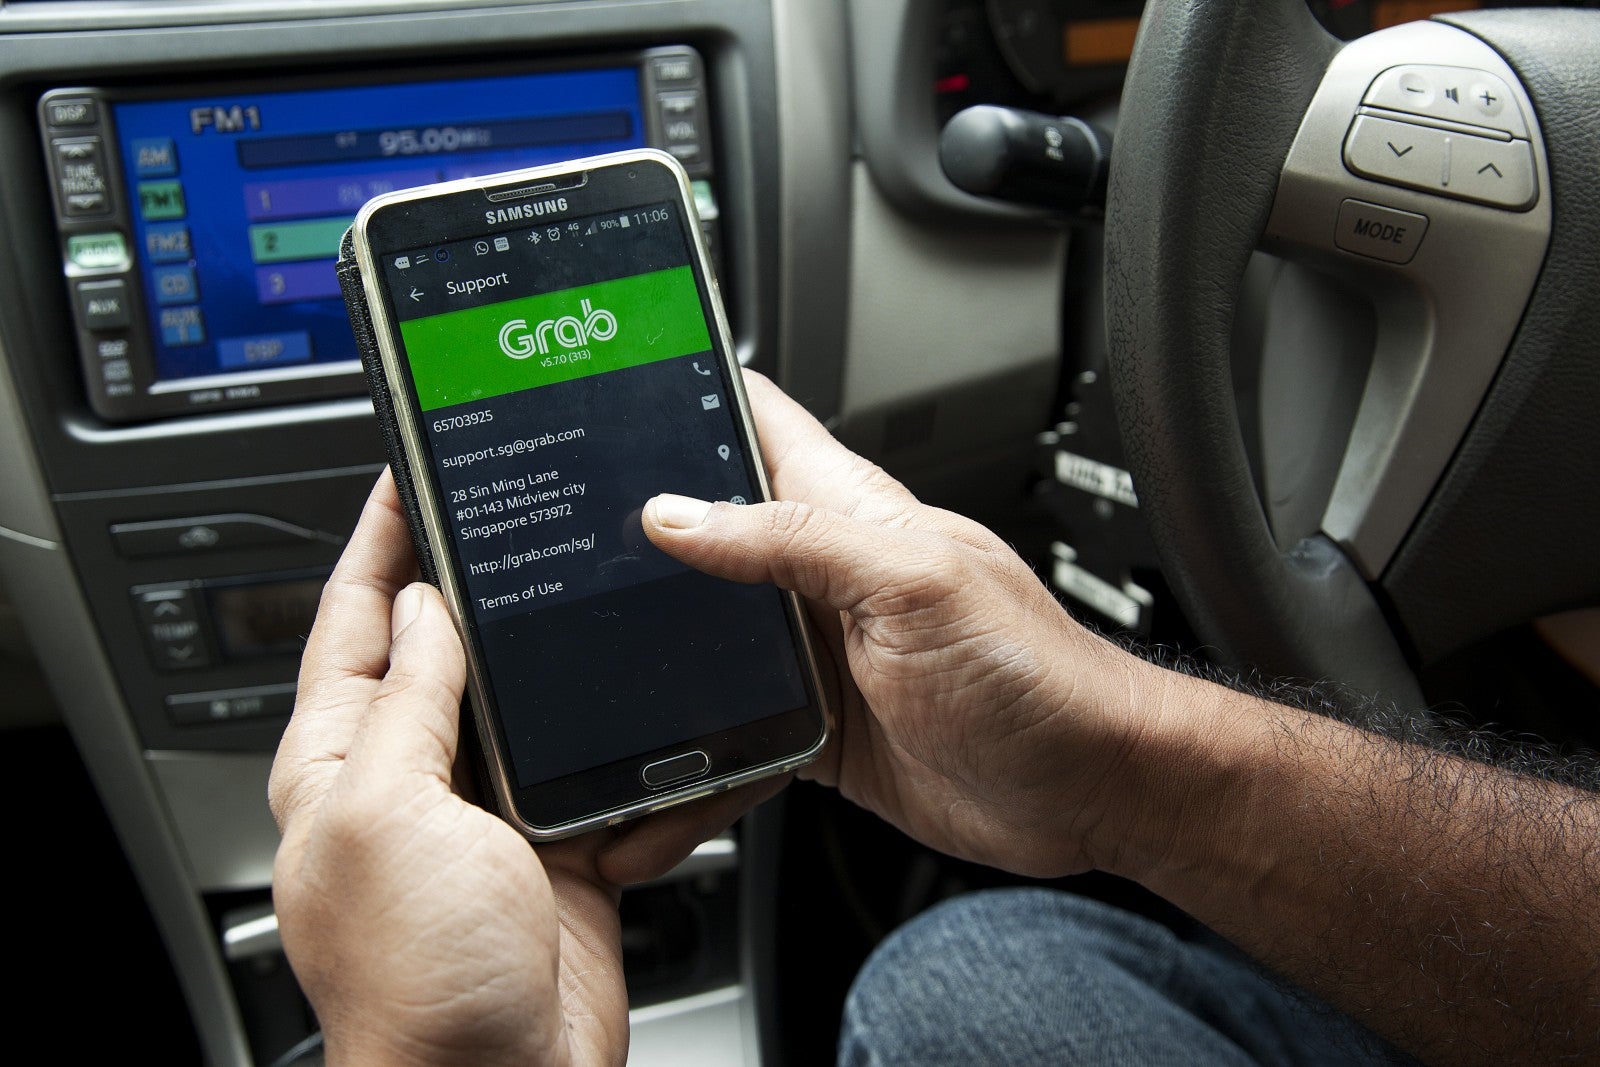 Grab to Hide Passenger Destination From Drivers to Reduce Cancellation, Will M'sia Follow Suit? - WORLD OF BUZZ